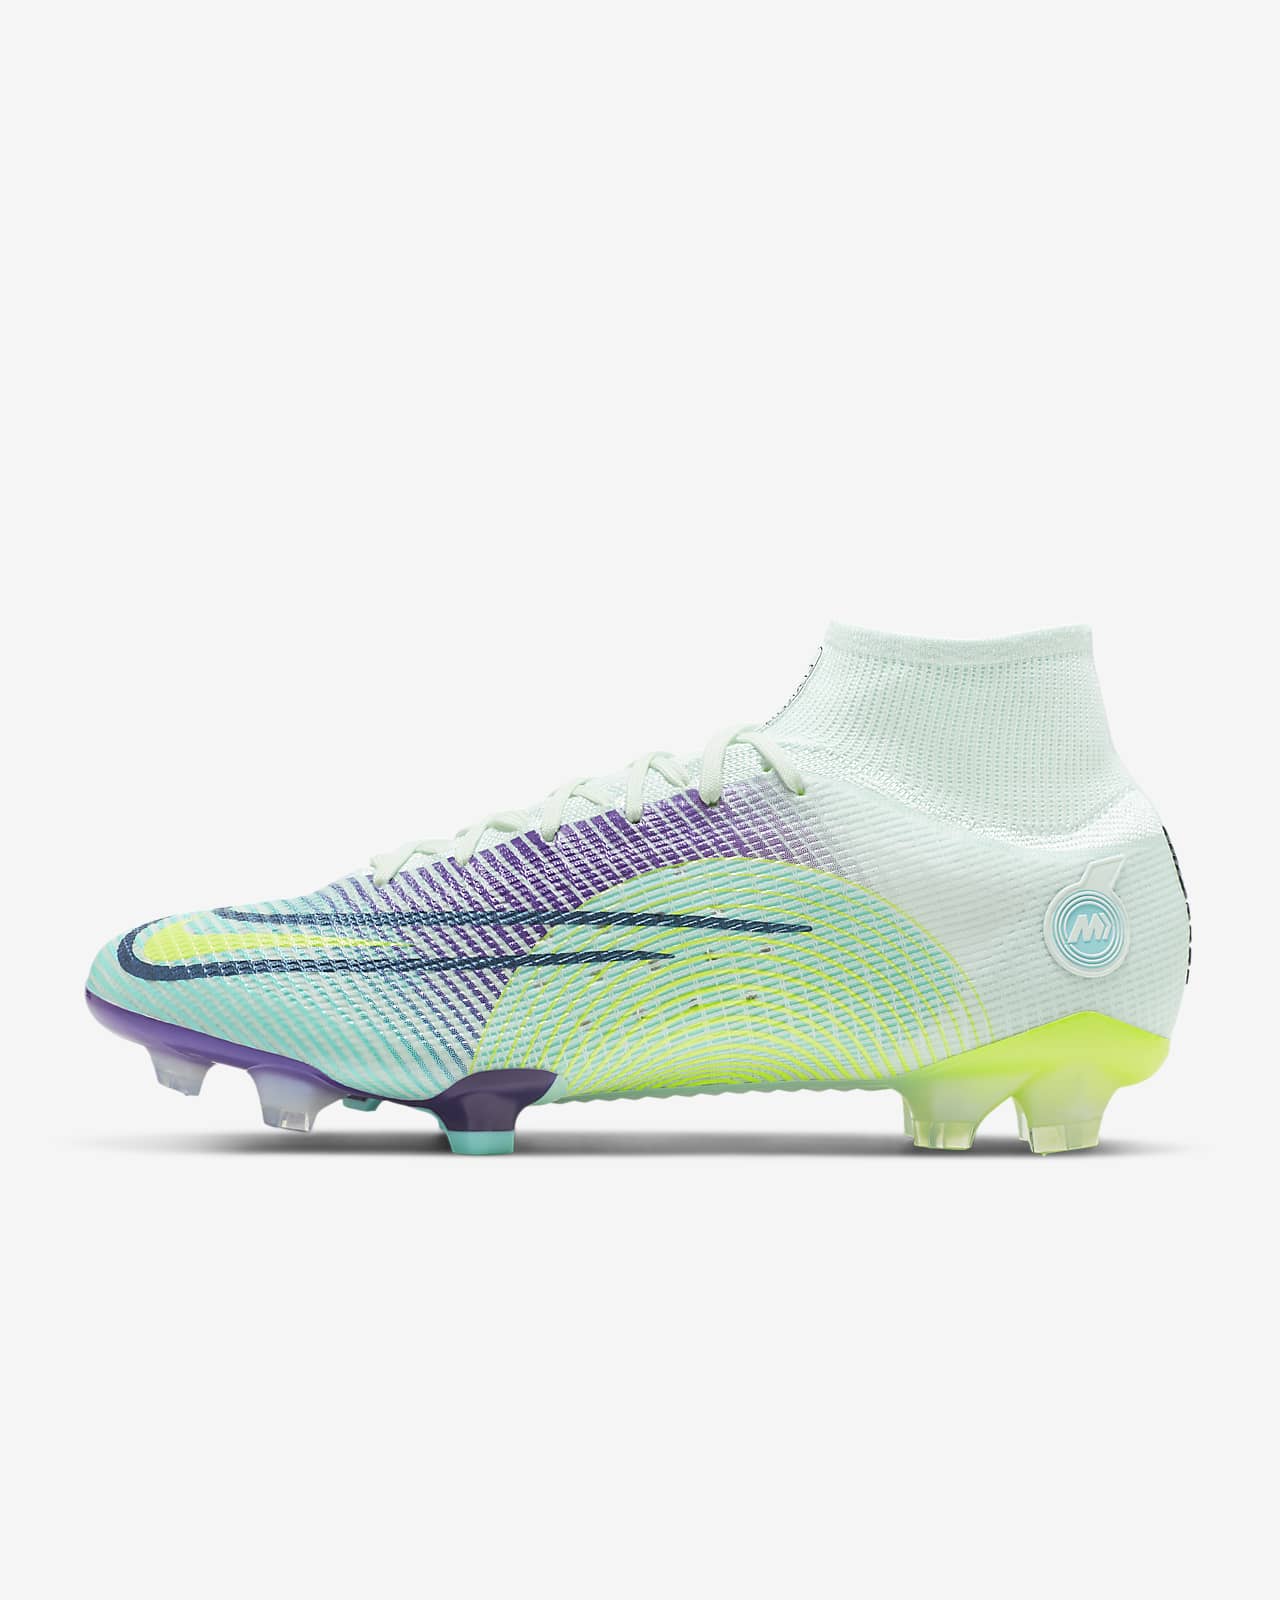 Nike Mercurial Dream Speed Superfly 8 Elite FG Firm-Ground Football Boot